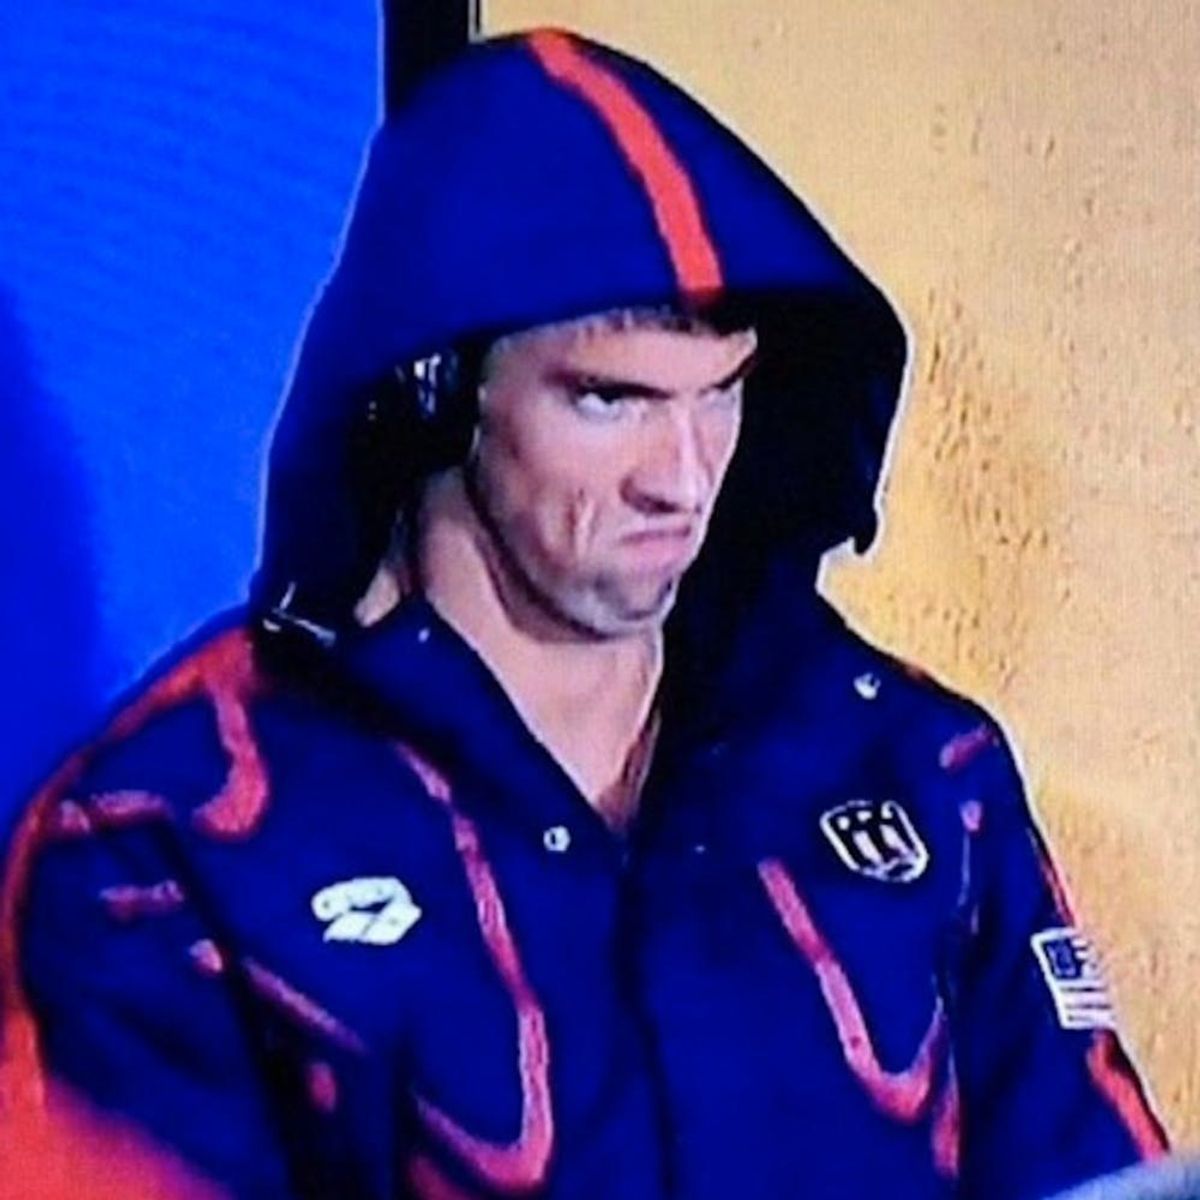 Morning Buzz! Michael Phelps’ Epic Mad Face Is the Best Olympics Meme Yet + More